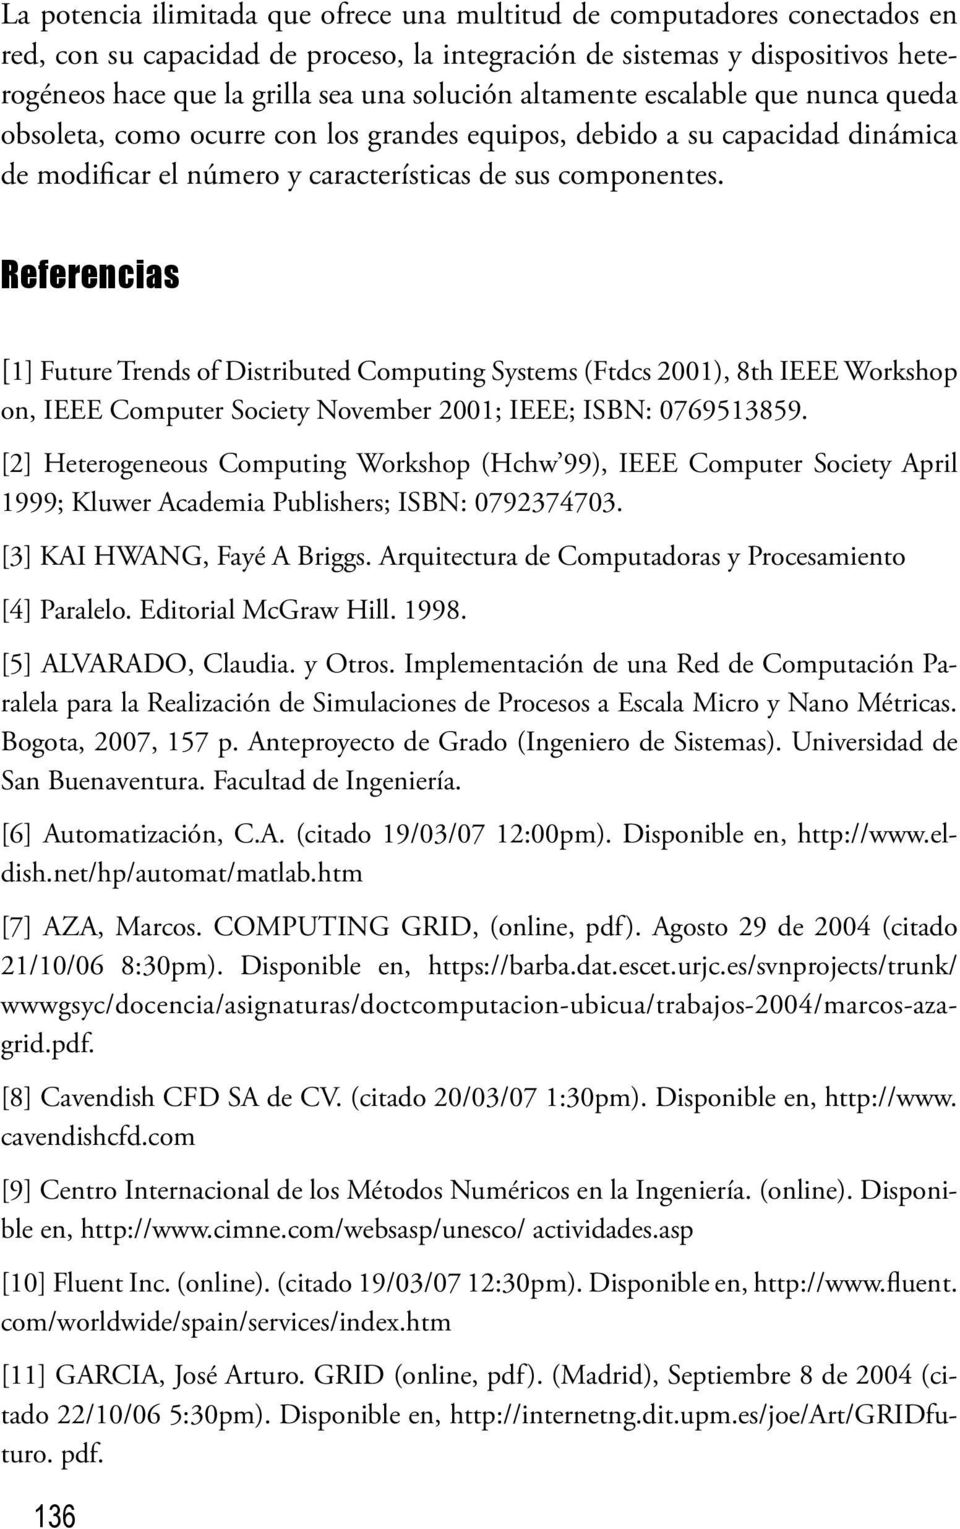 Referencias [1] Future Trends of Distributed Computing Systems (Ftdcs 2001), 8th IEEE Workshop on, IEEE Computer Society November 2001; IEEE; ISBN: 0769513859.